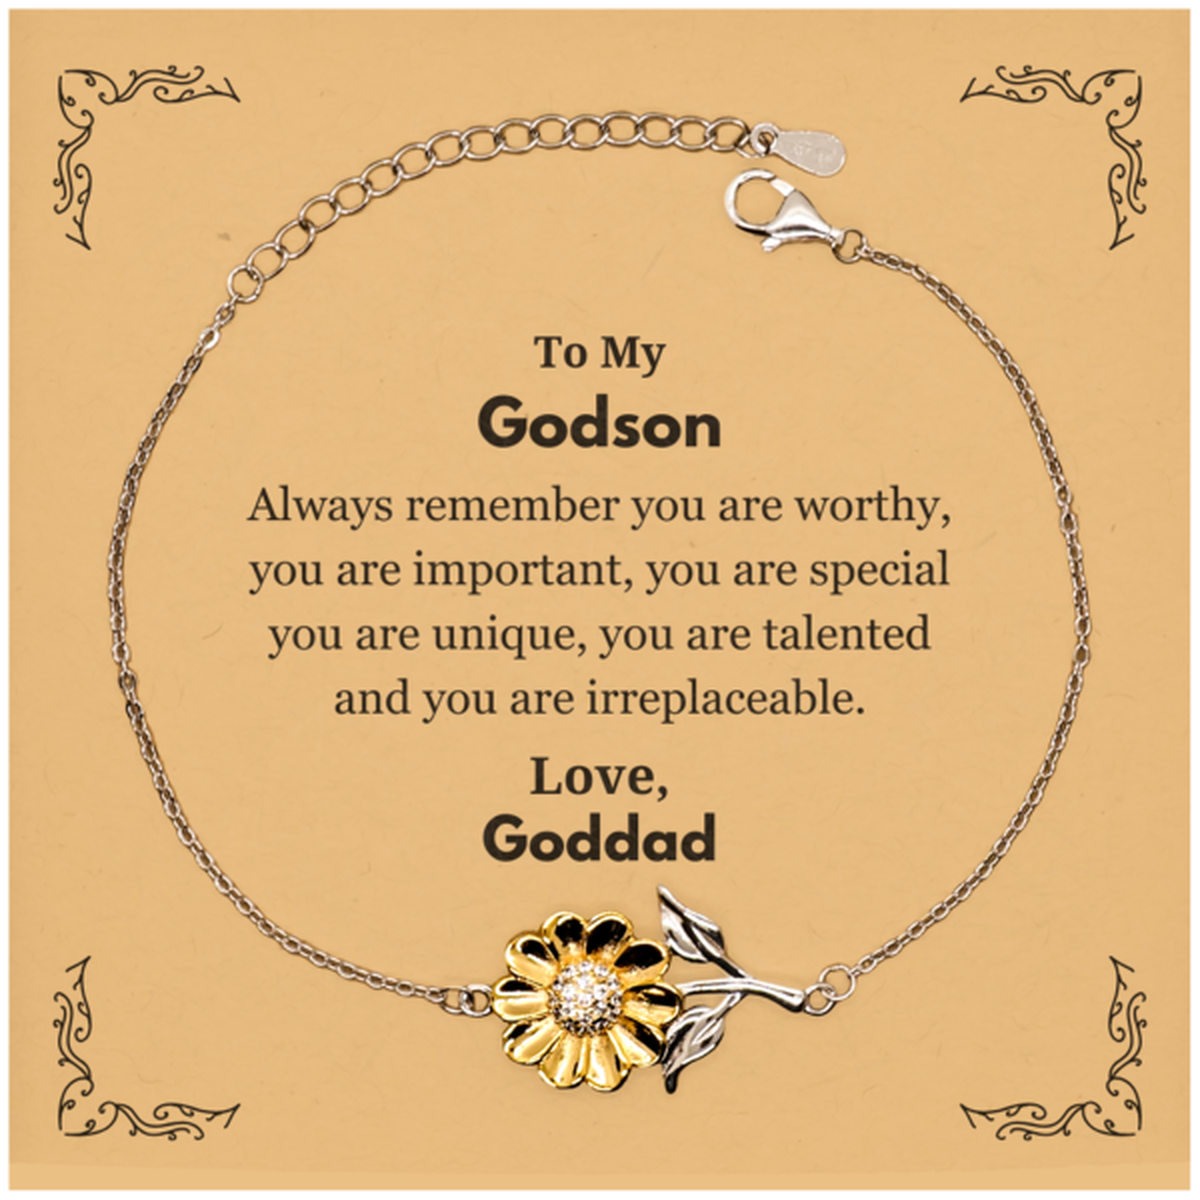 Godson Birthday Gifts from Goddad, Inspirational Sunflower Bracelet for Godson Christmas Graduation Gifts for Godson Always remember you are worthy, you are important. Love, Goddad